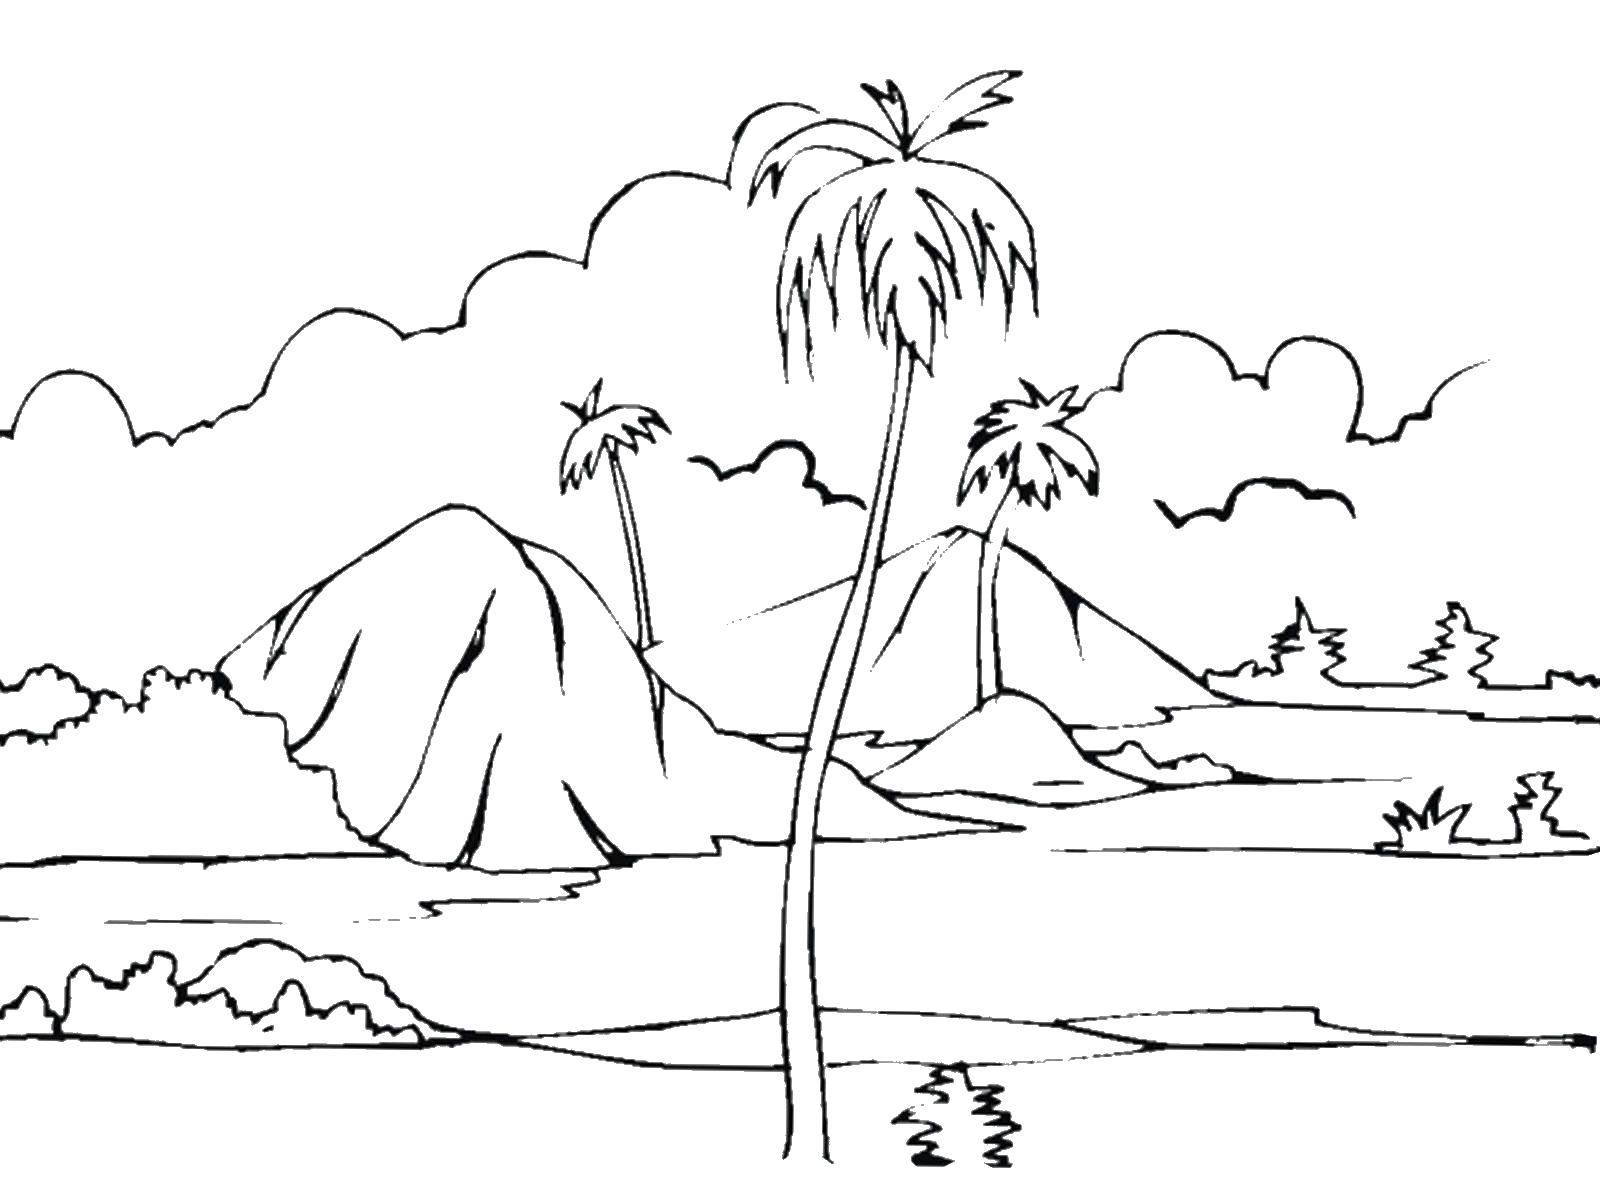 Coloring Palm trees. Category Nature. Tags:  palm trees.